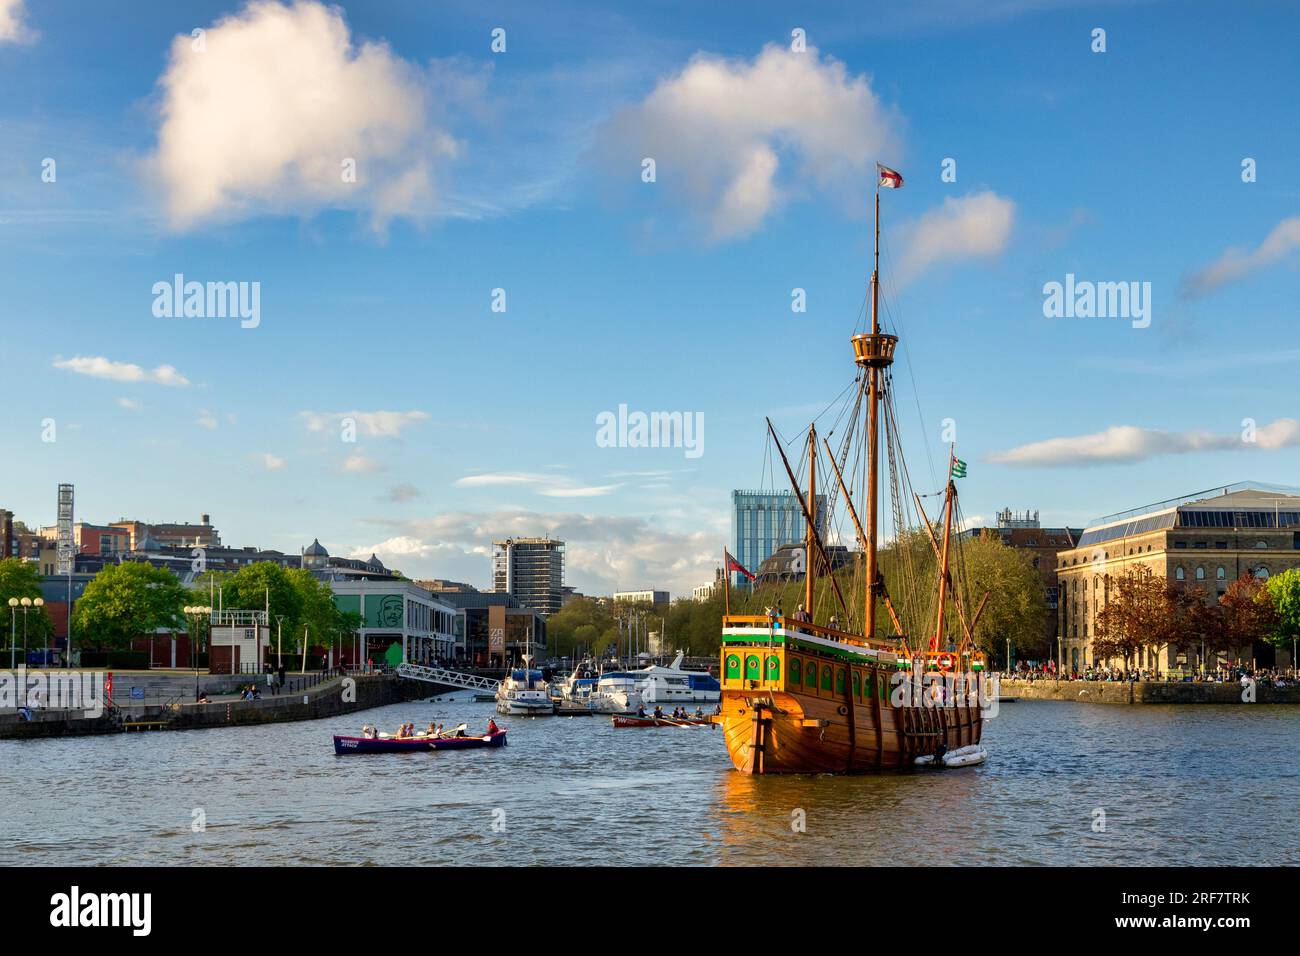 10 May 2023: Bristol, UK - Bristol Docks, with the Matthew  on a beautiful spring evening. The Matthew is a replica of the ship John Cabot sailed to... Stock Photo